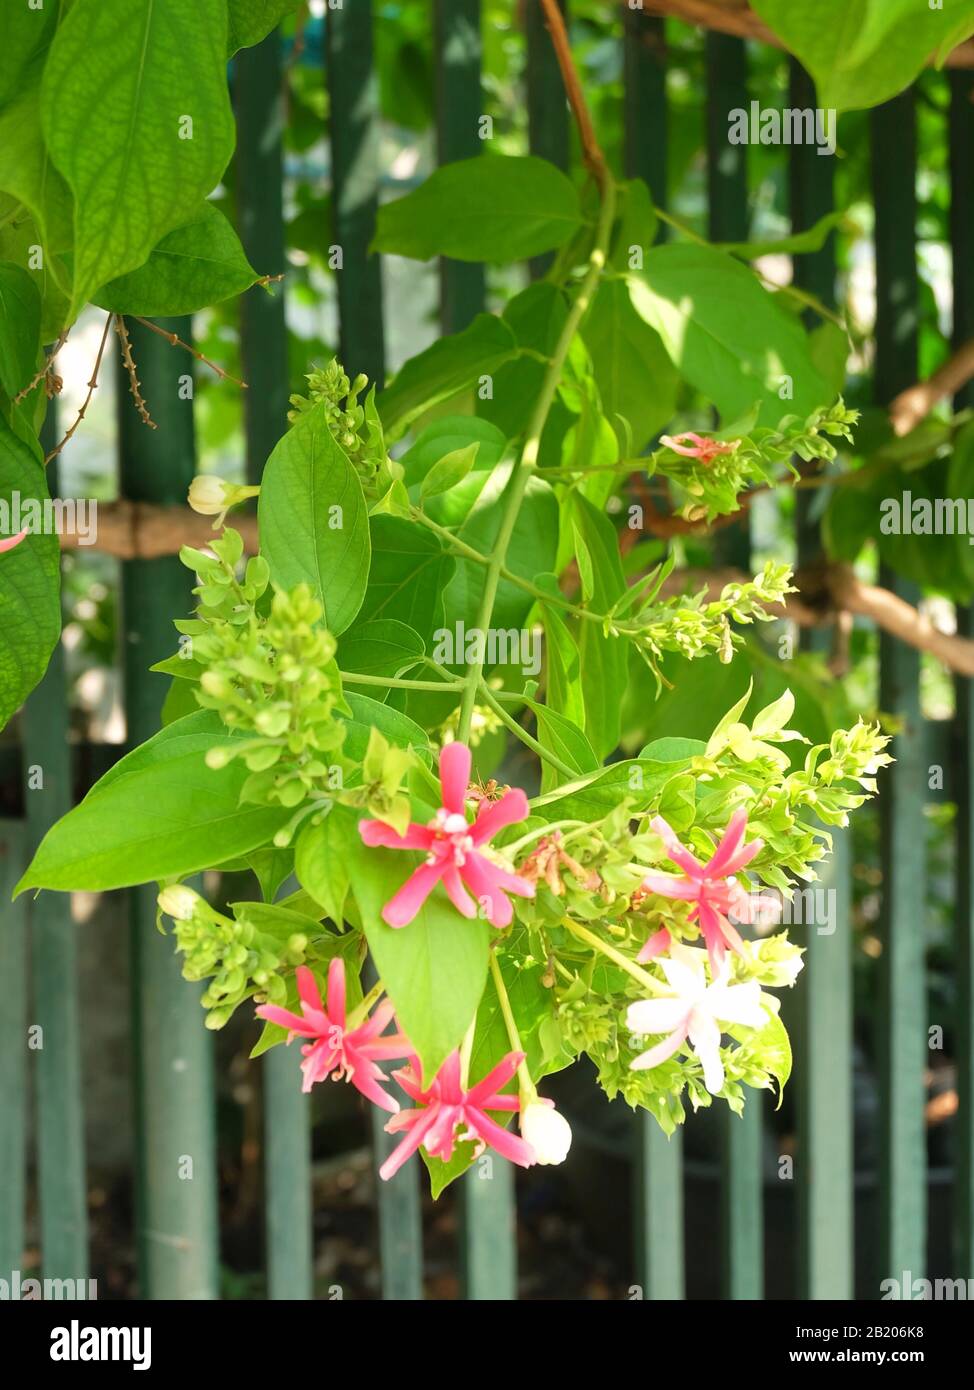 The Bunch of Beautiful Red Rangoon Creeper, Chinese Honeysuckle or Combretum Indicum Flowers with Green Leaves on Tree. Stock Photo